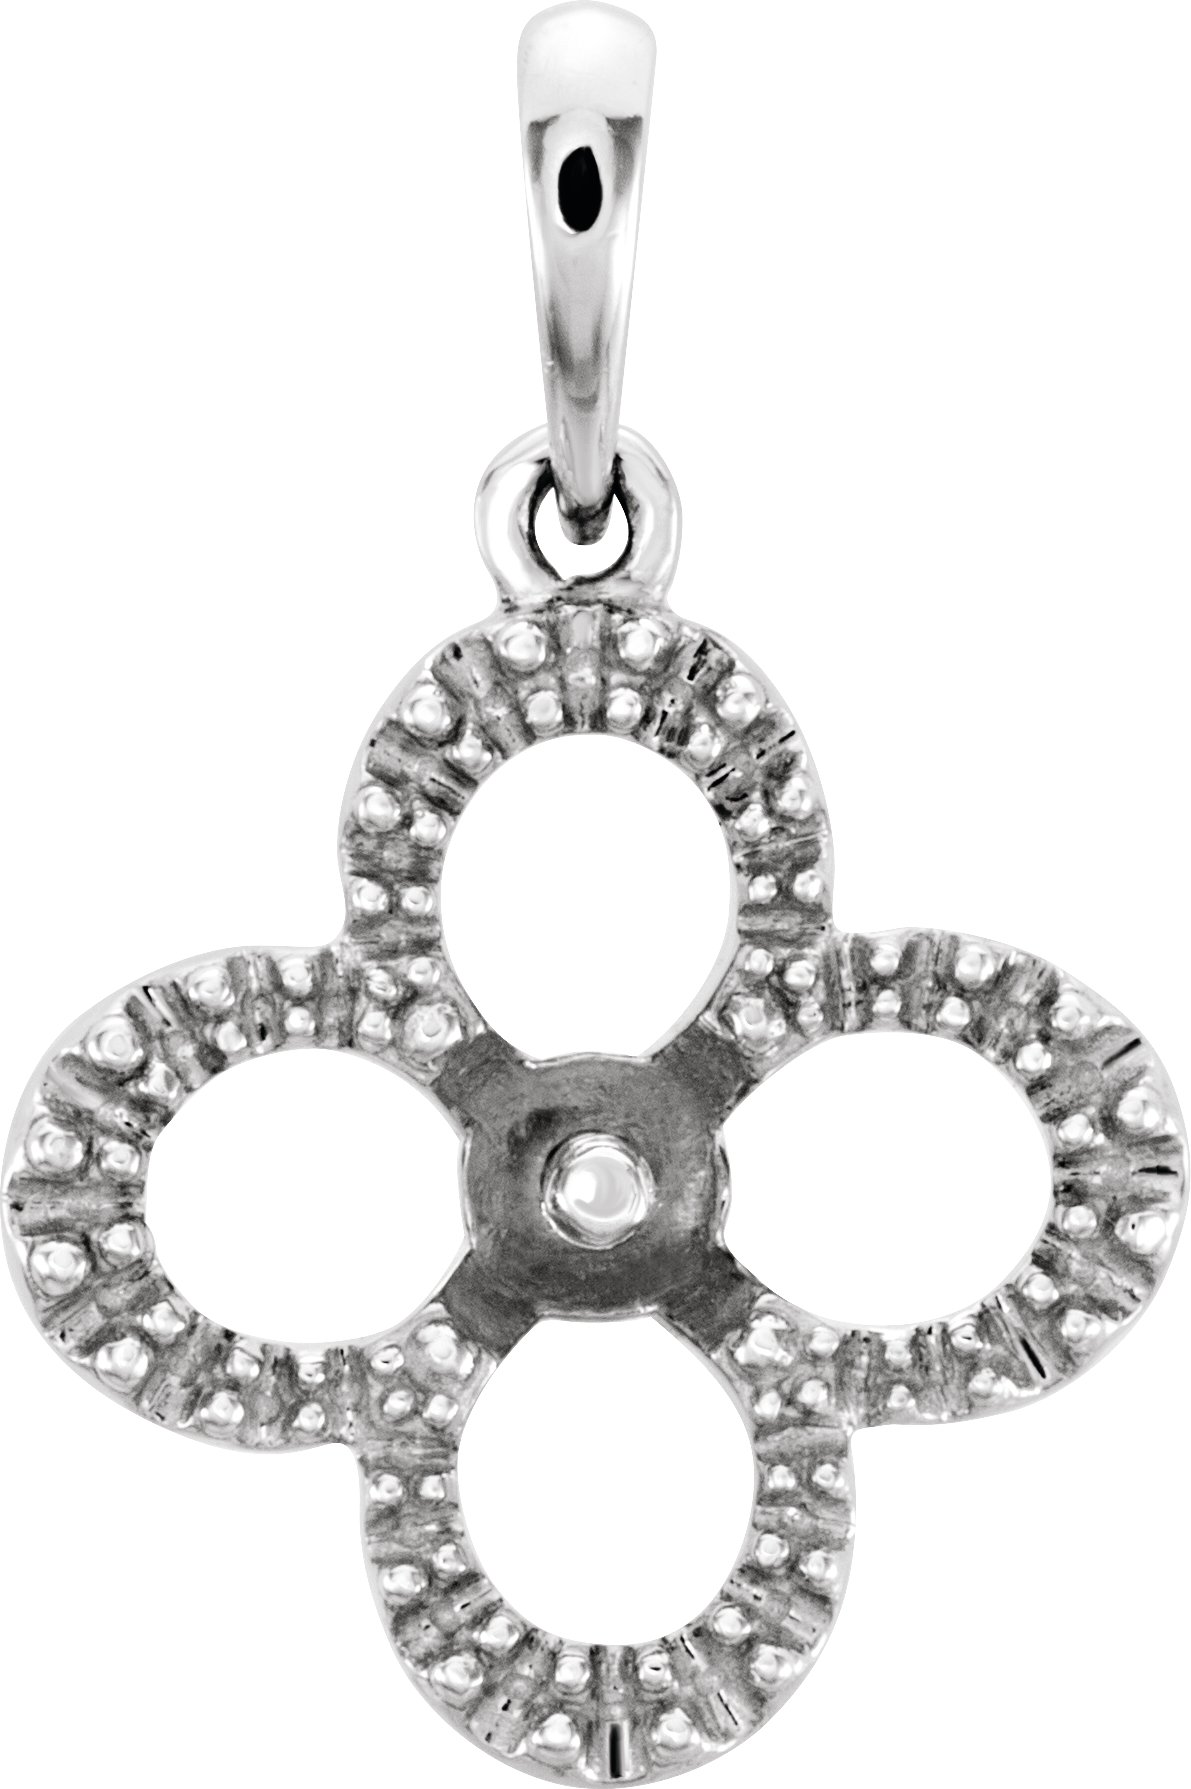 Freshwater Cultured Pearl & Diamond Clover Pendant or Mounting